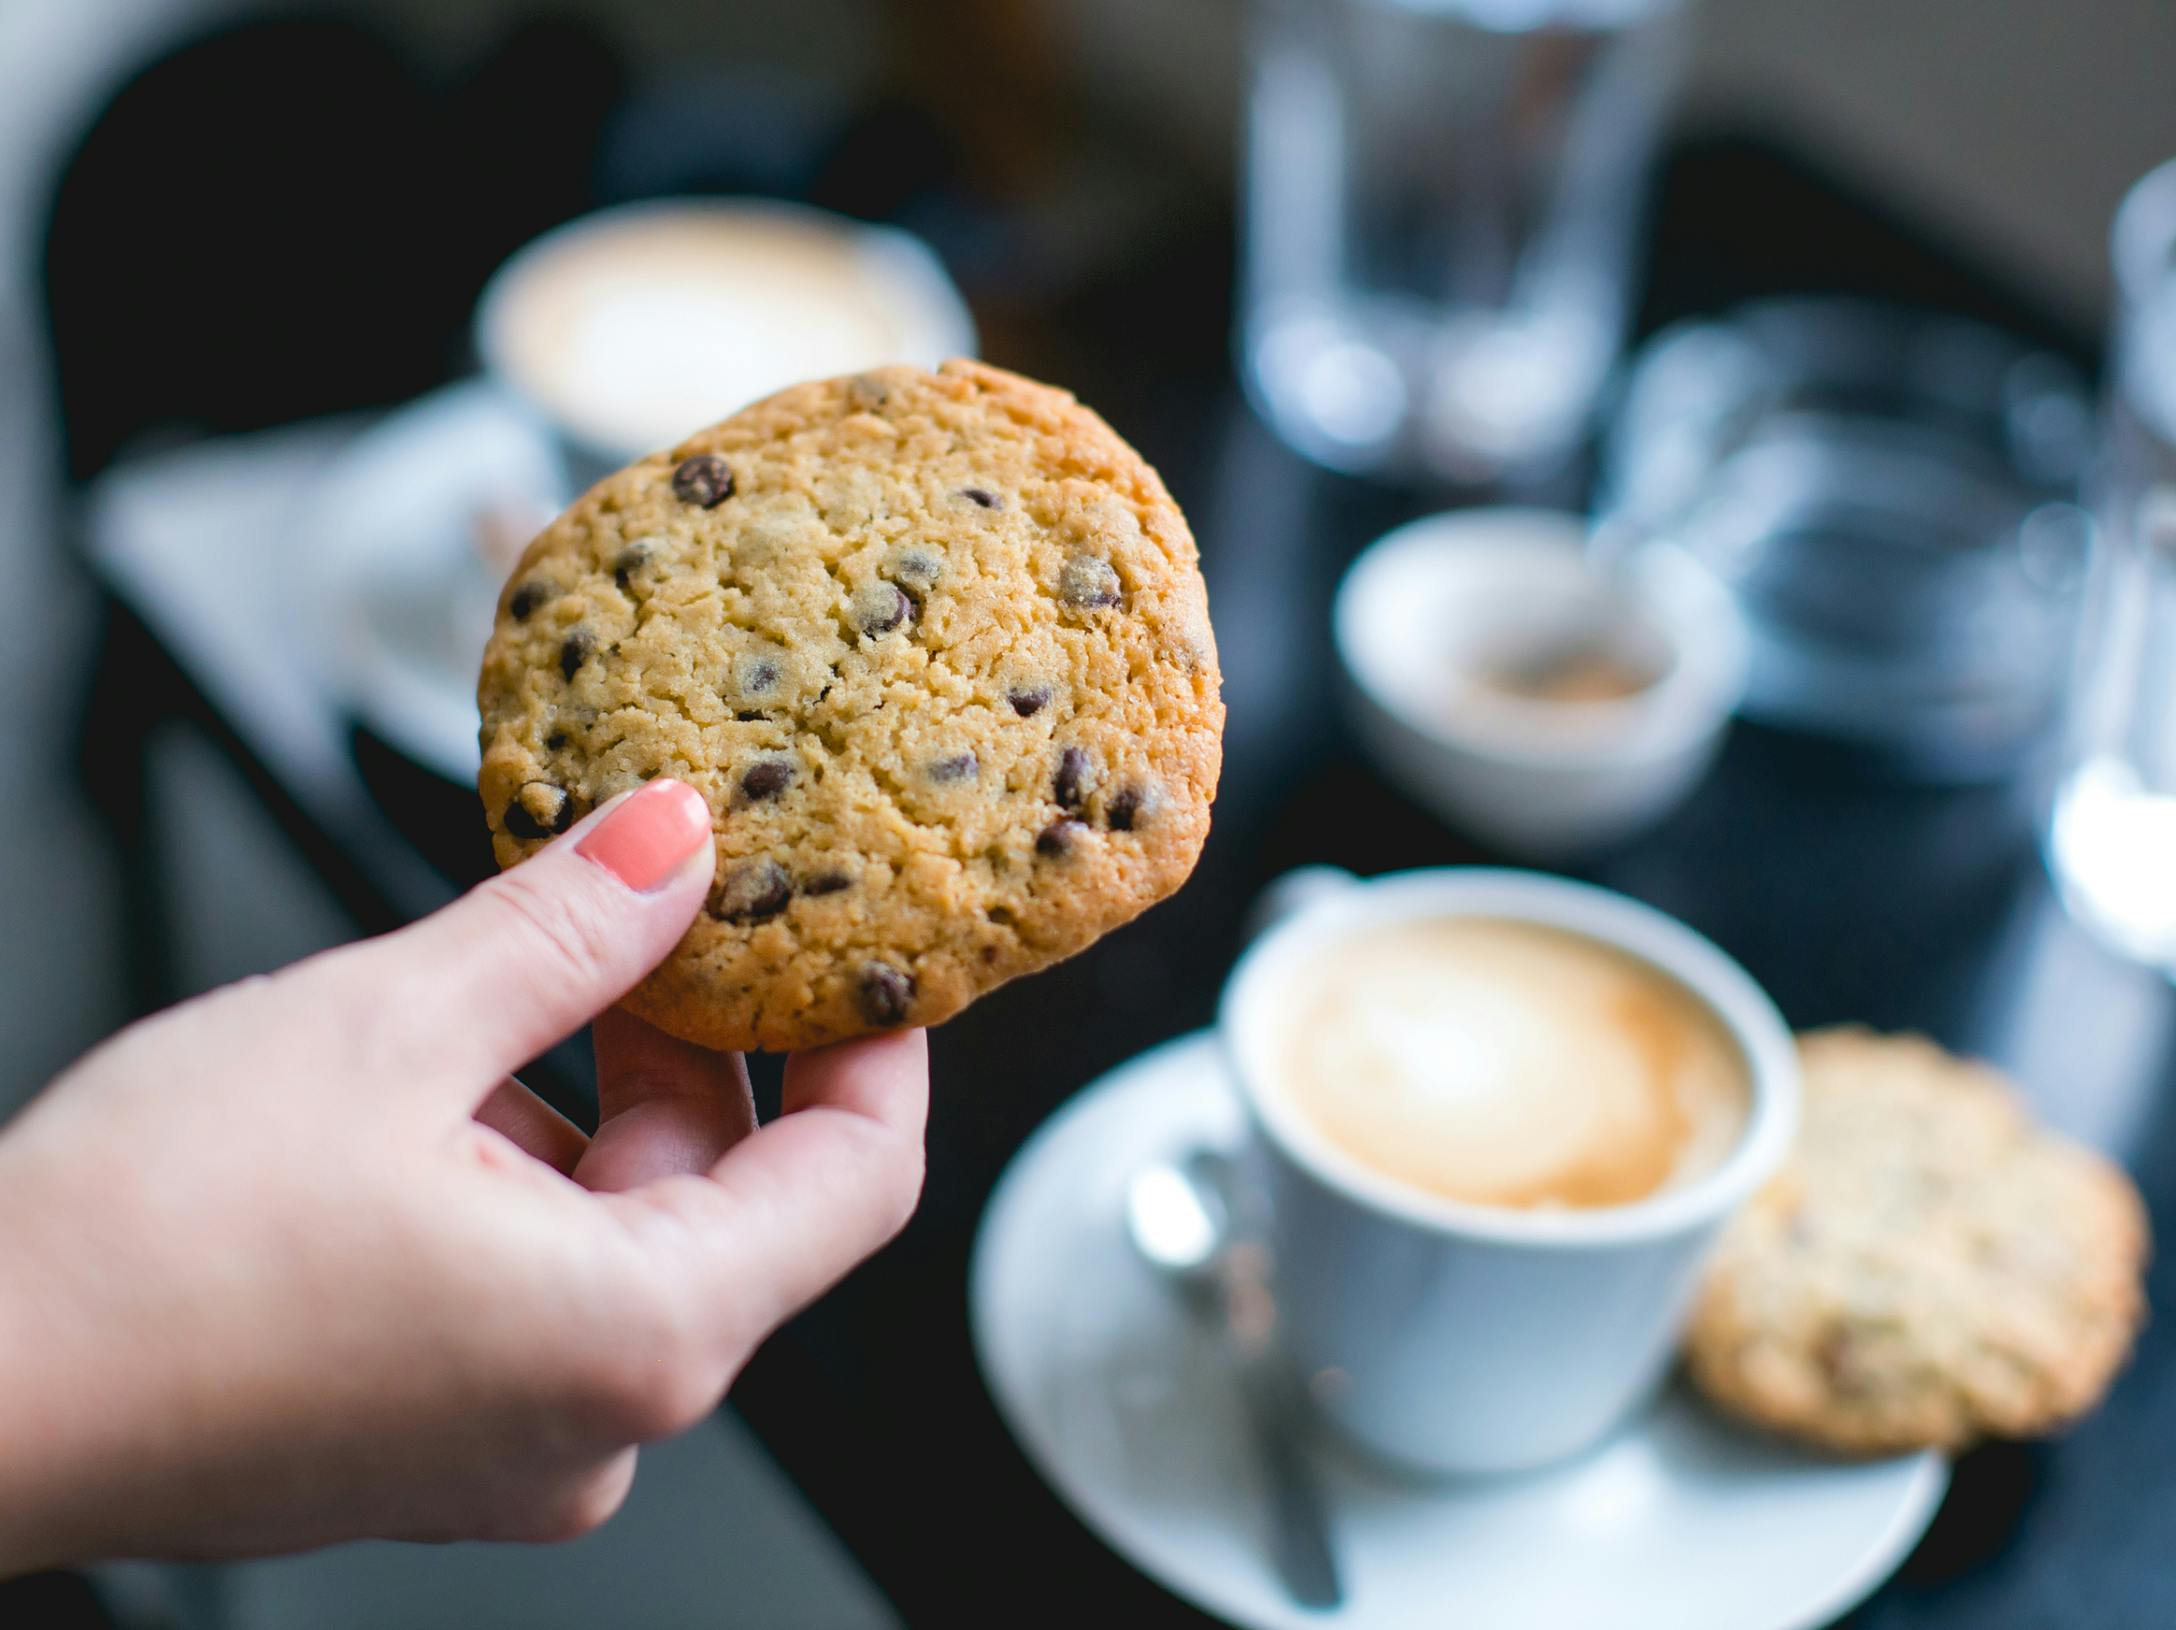 A person holding a cookie in front of a table in a restaurant or cafe